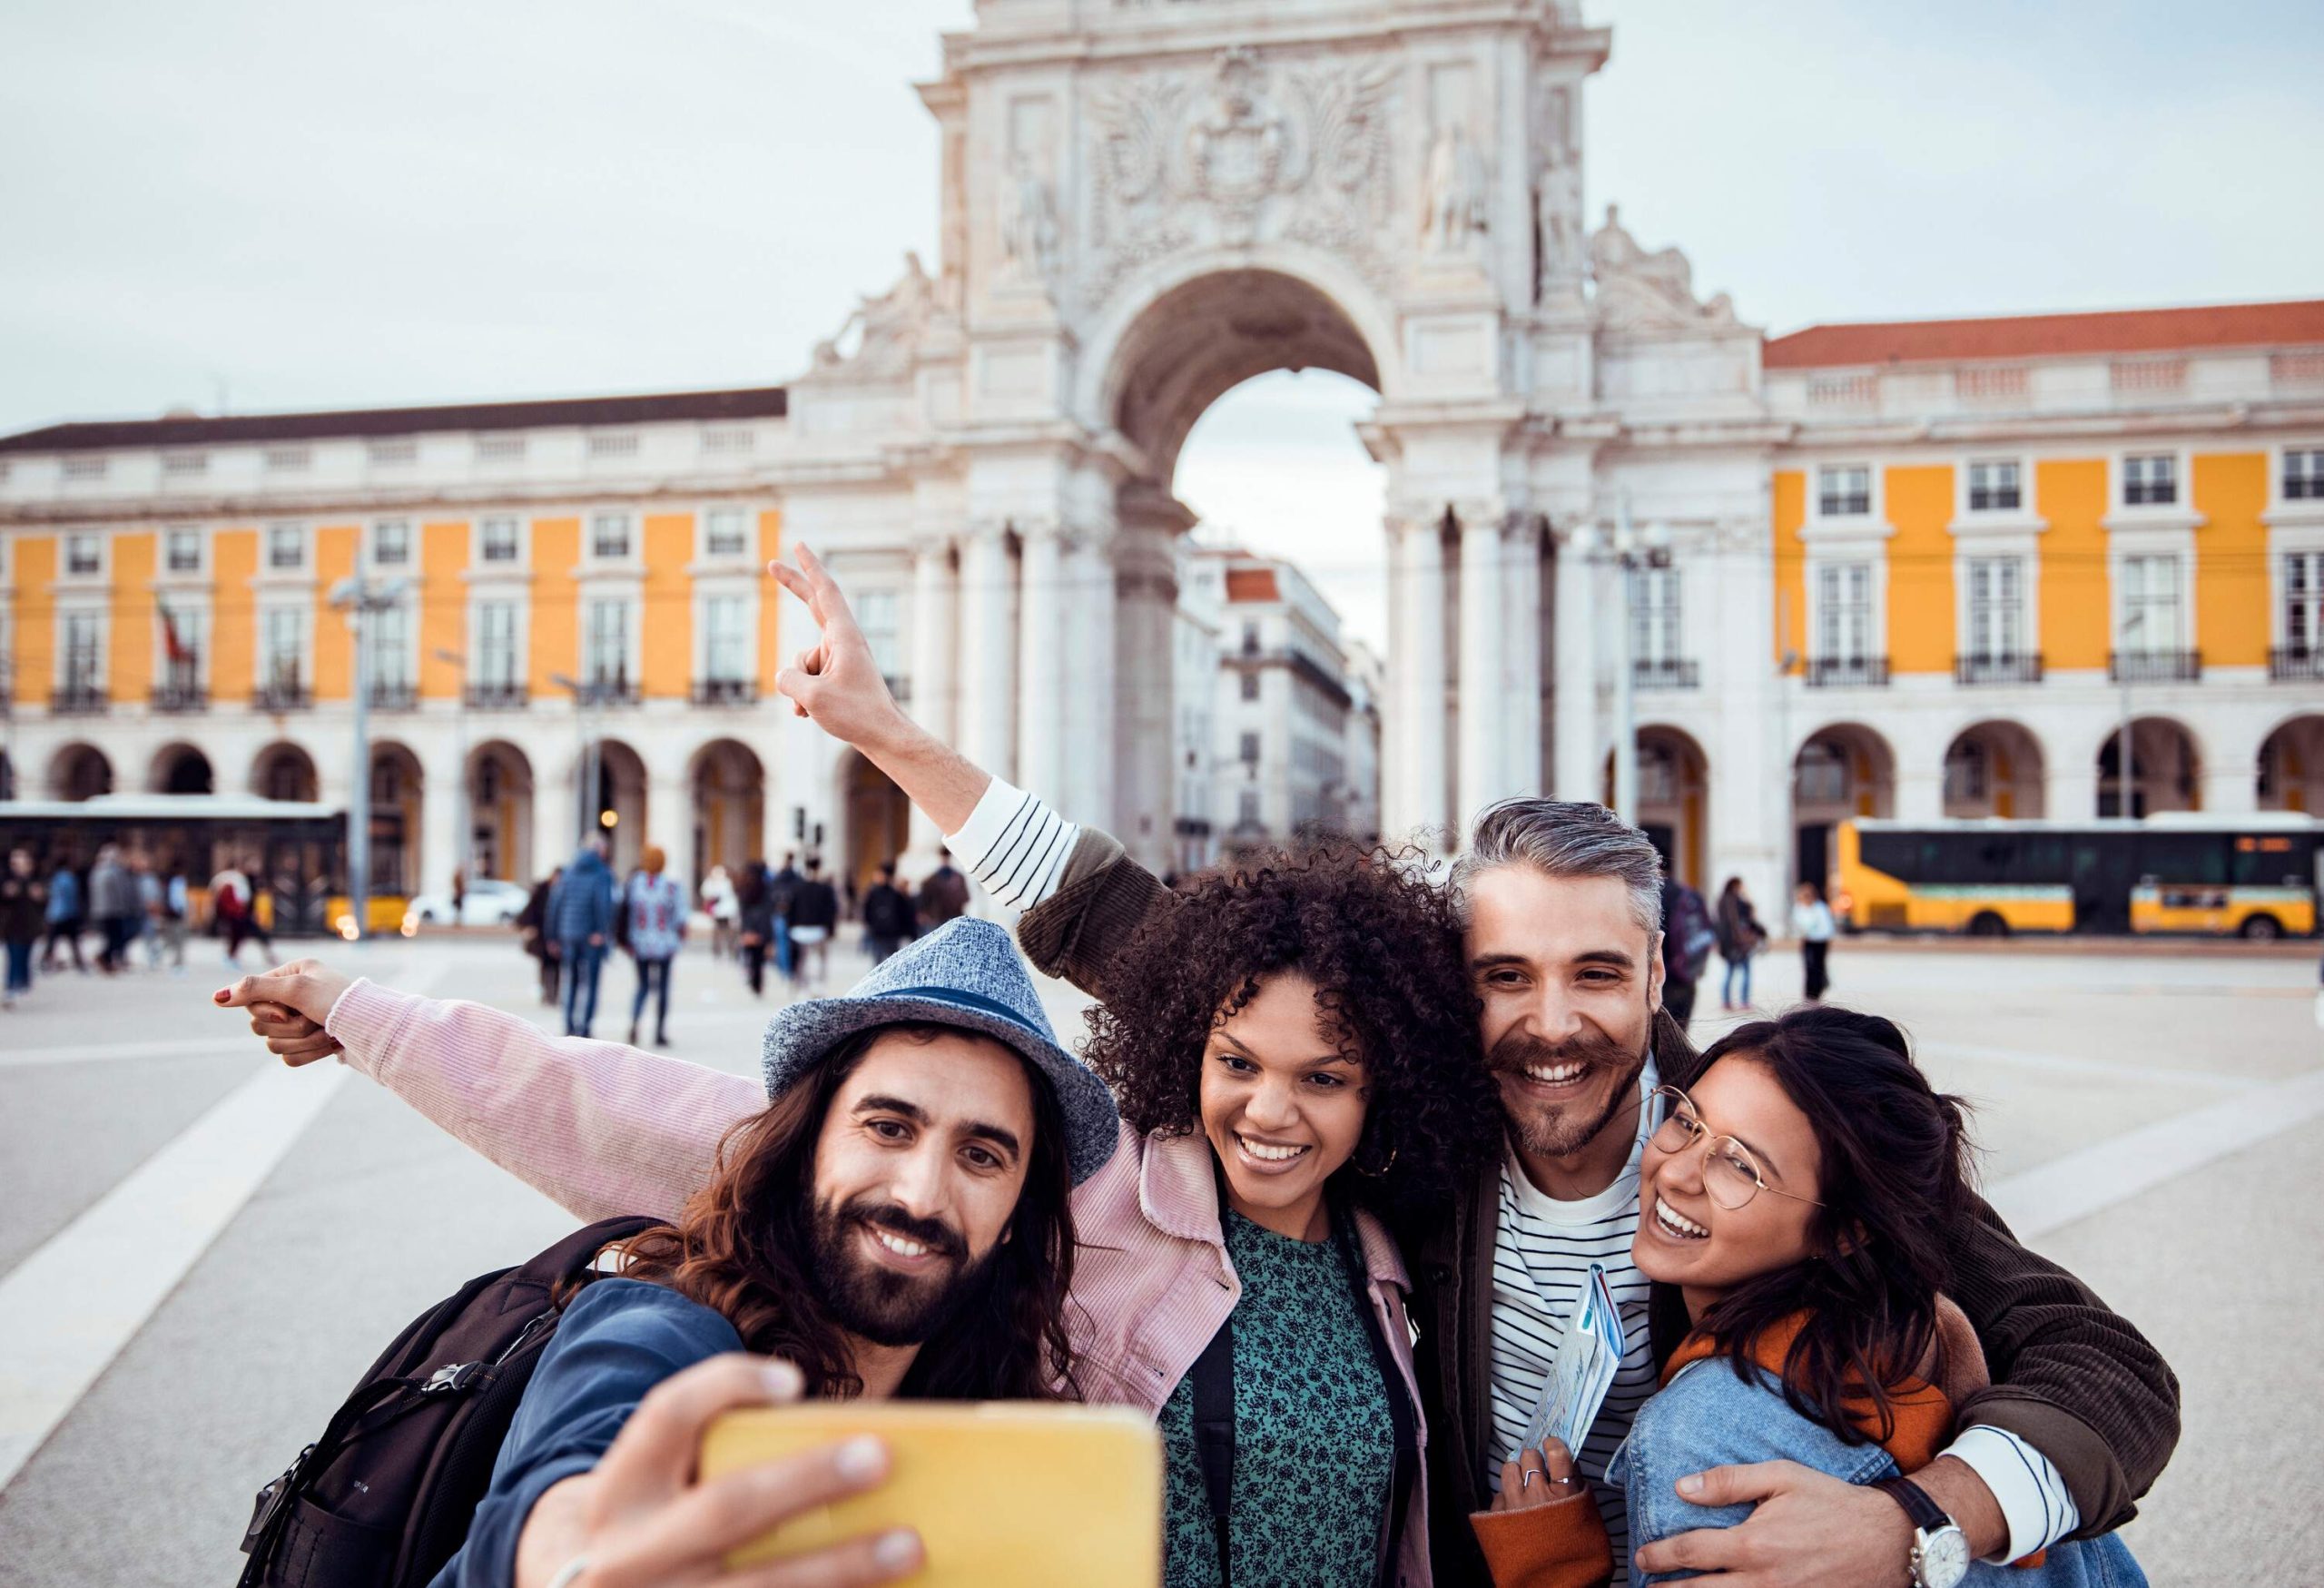 Four friends smile as they took a group photo using a smartphone in a public square with an arch monument in the background.